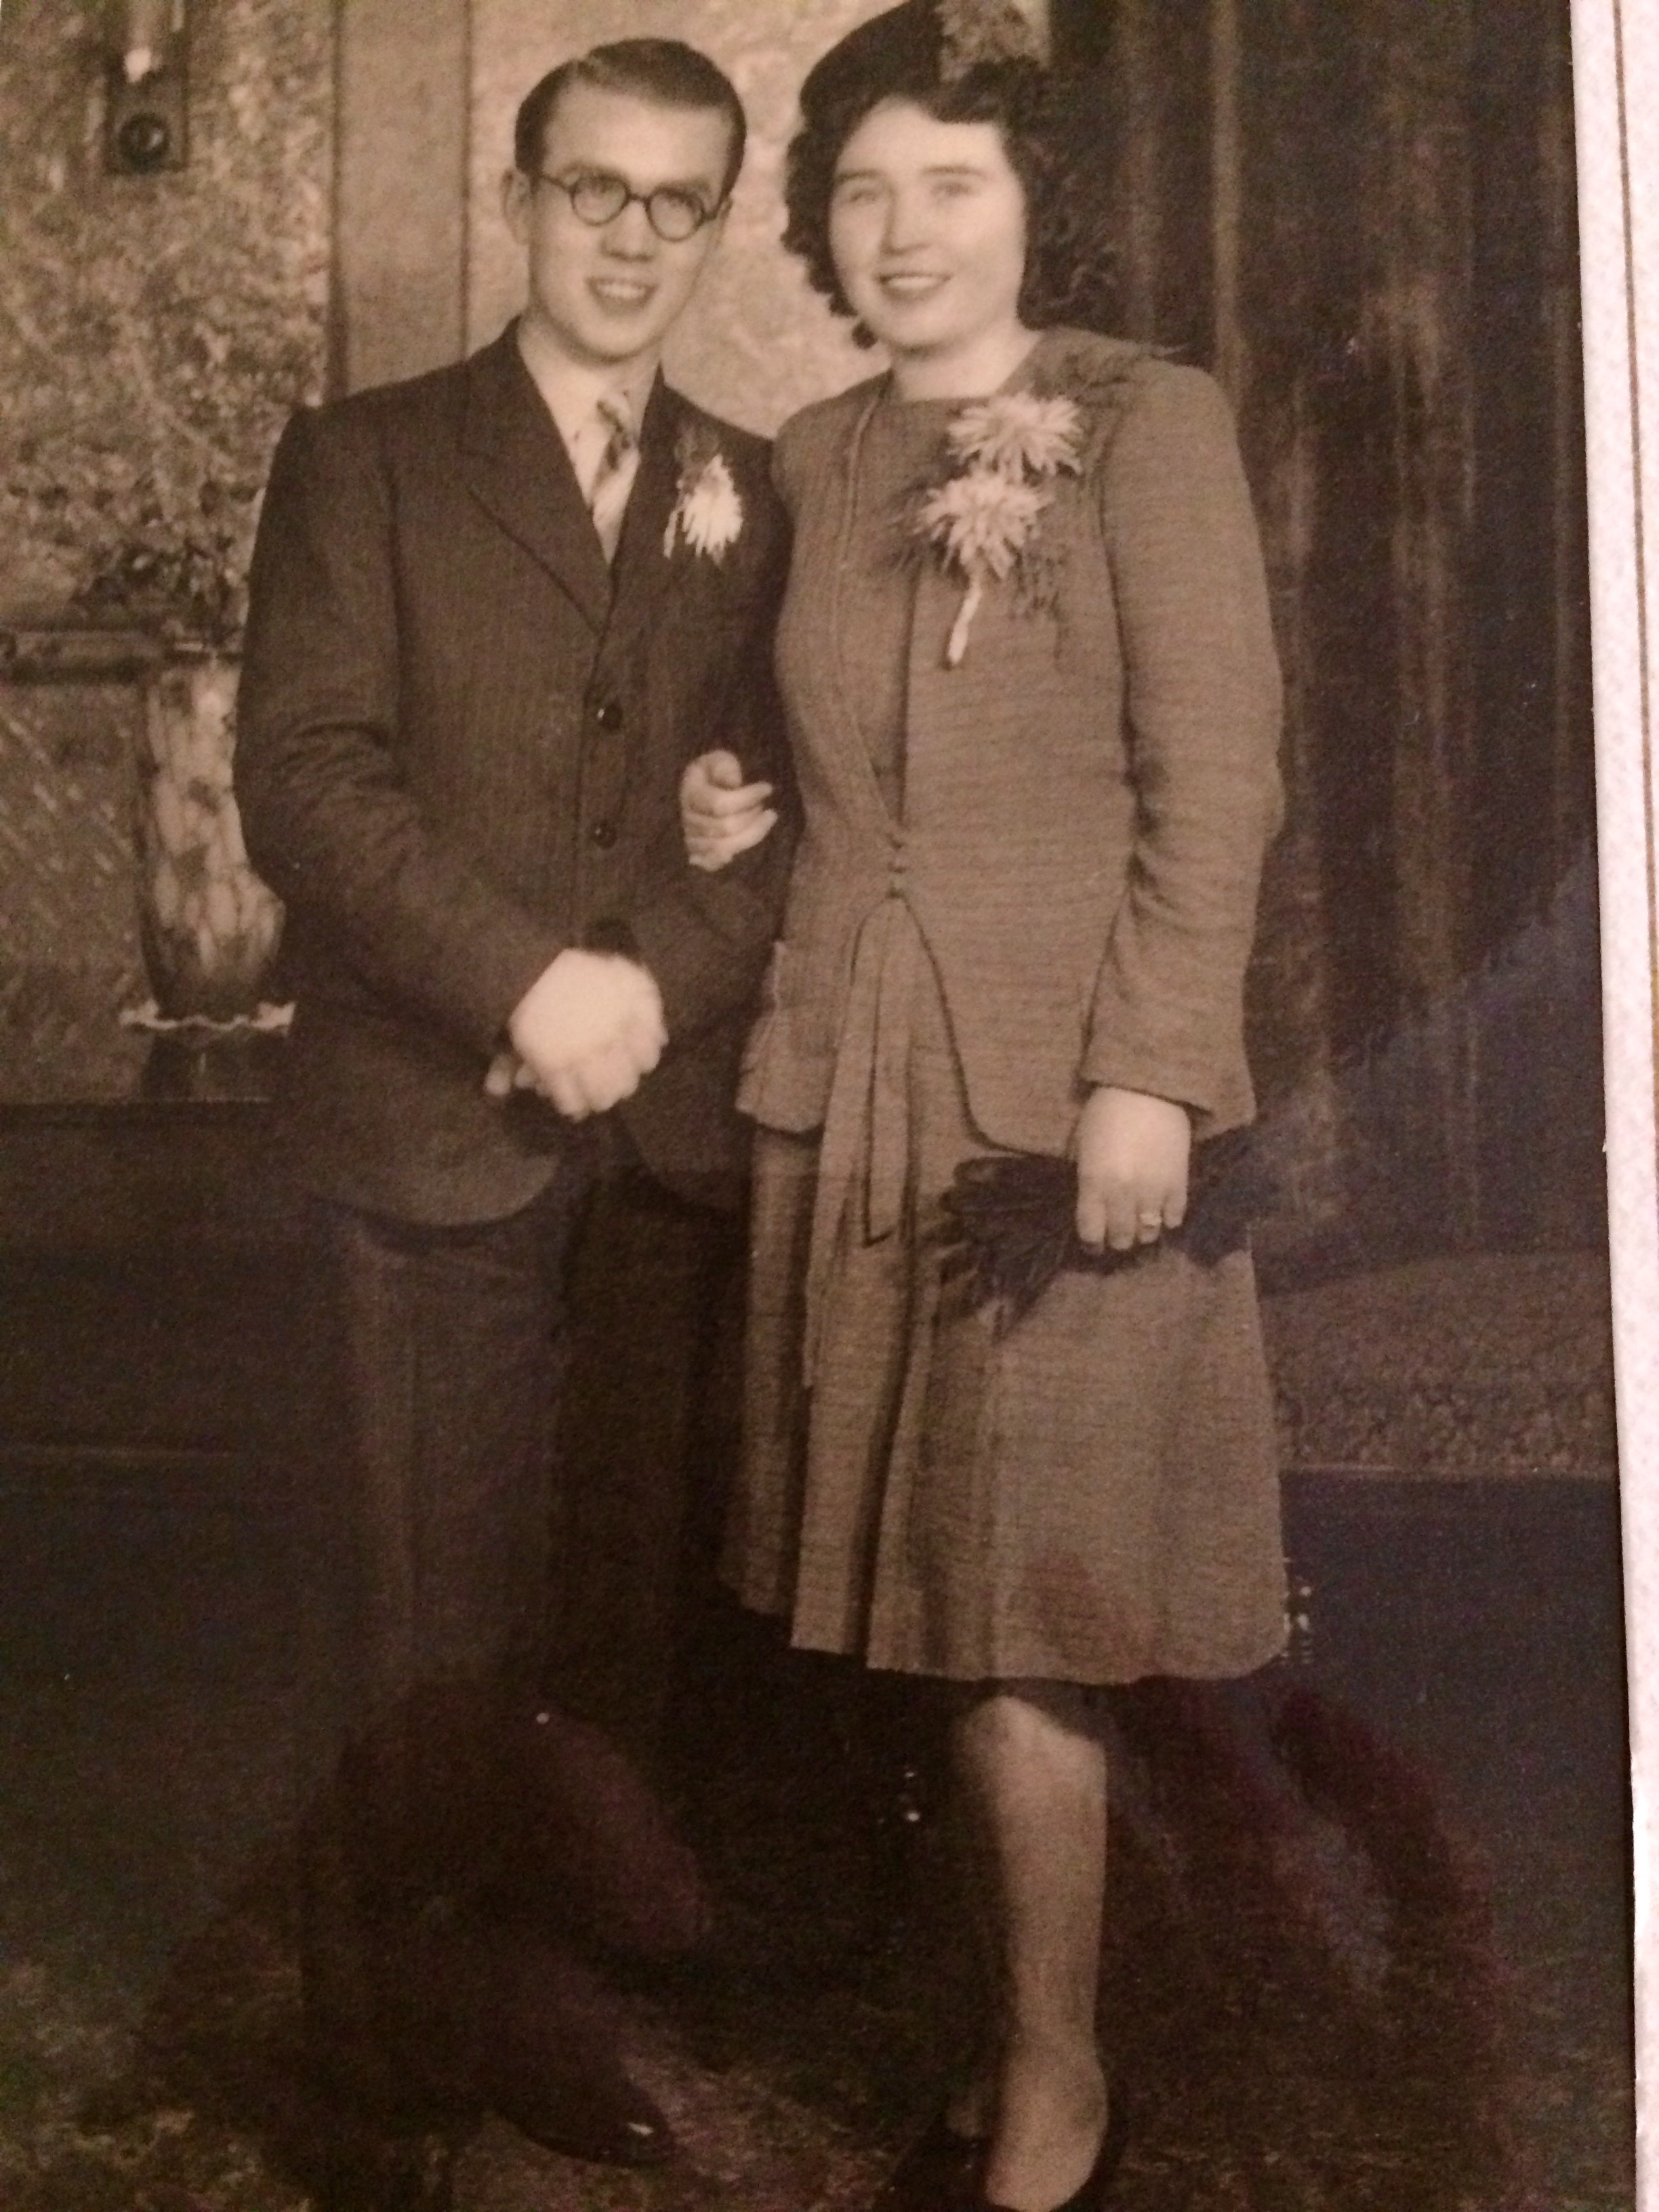 The happy couple, on this day 71 years ago